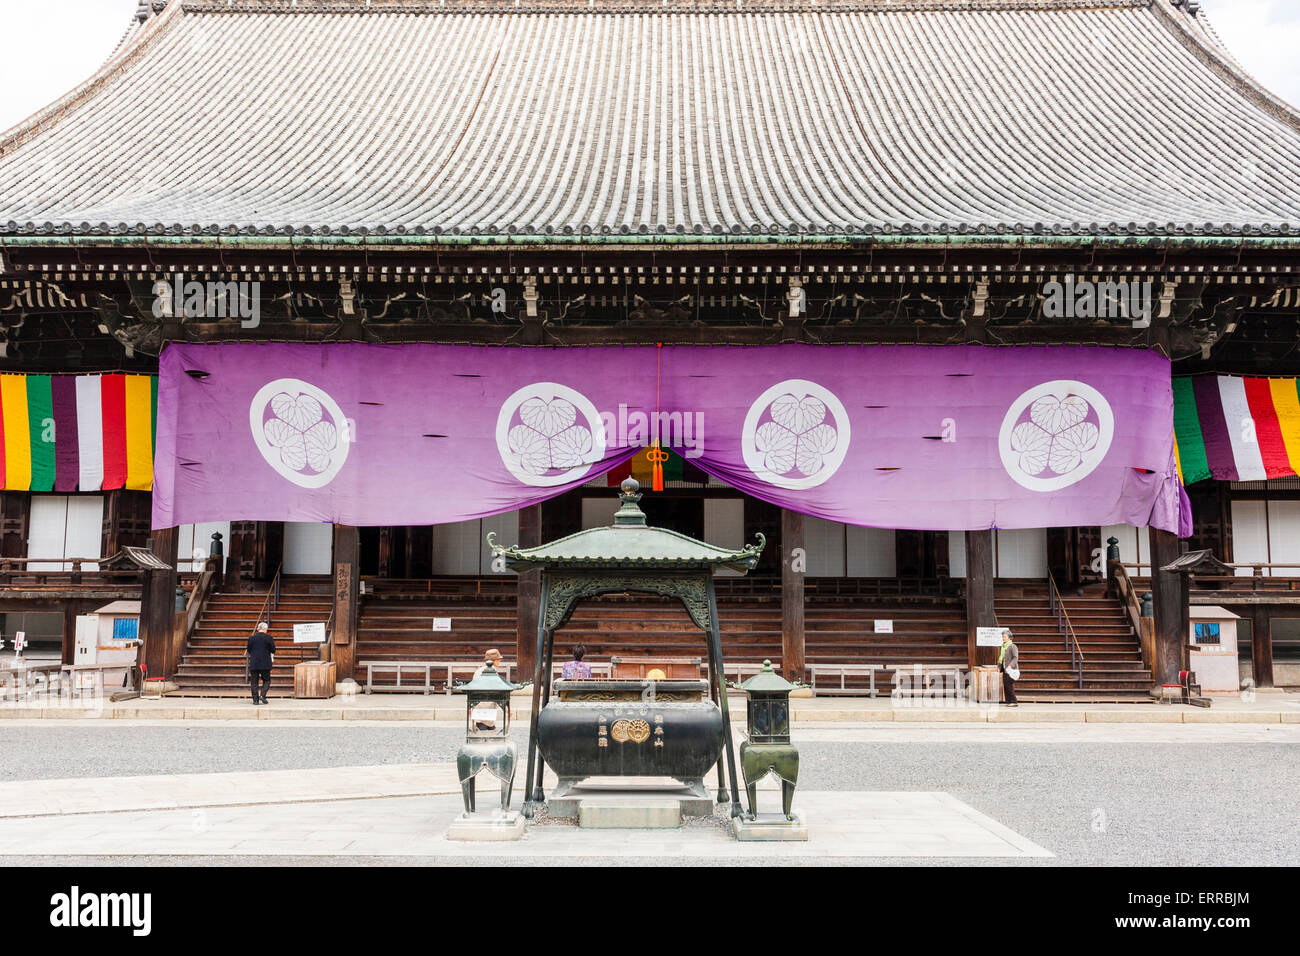 Incense burner in front of the Mie-do, main hall, with purple banners of with Tokugawa Aoi icon hanging from the roof eaves. Chion-in temple, Kyoto. Stock Photo